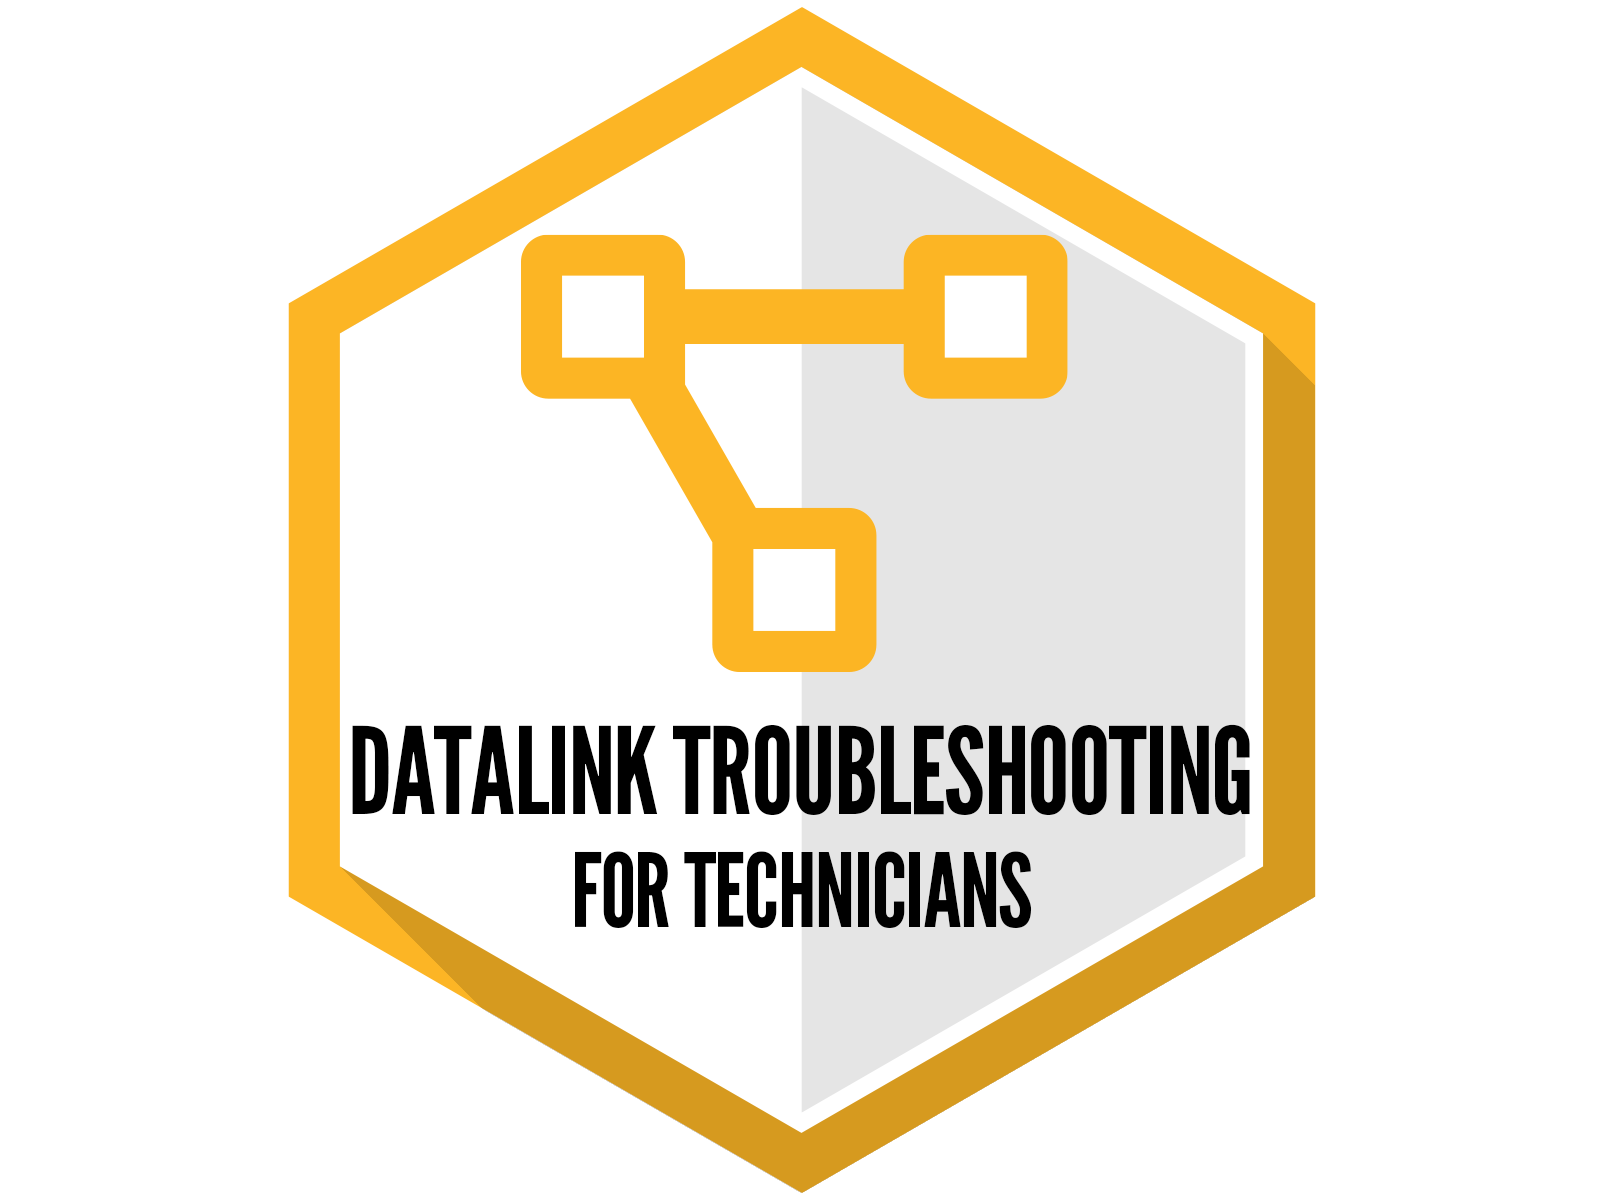 Datalink "J1939/J1708" Troubleshooting for Technicians - Chicago, IL